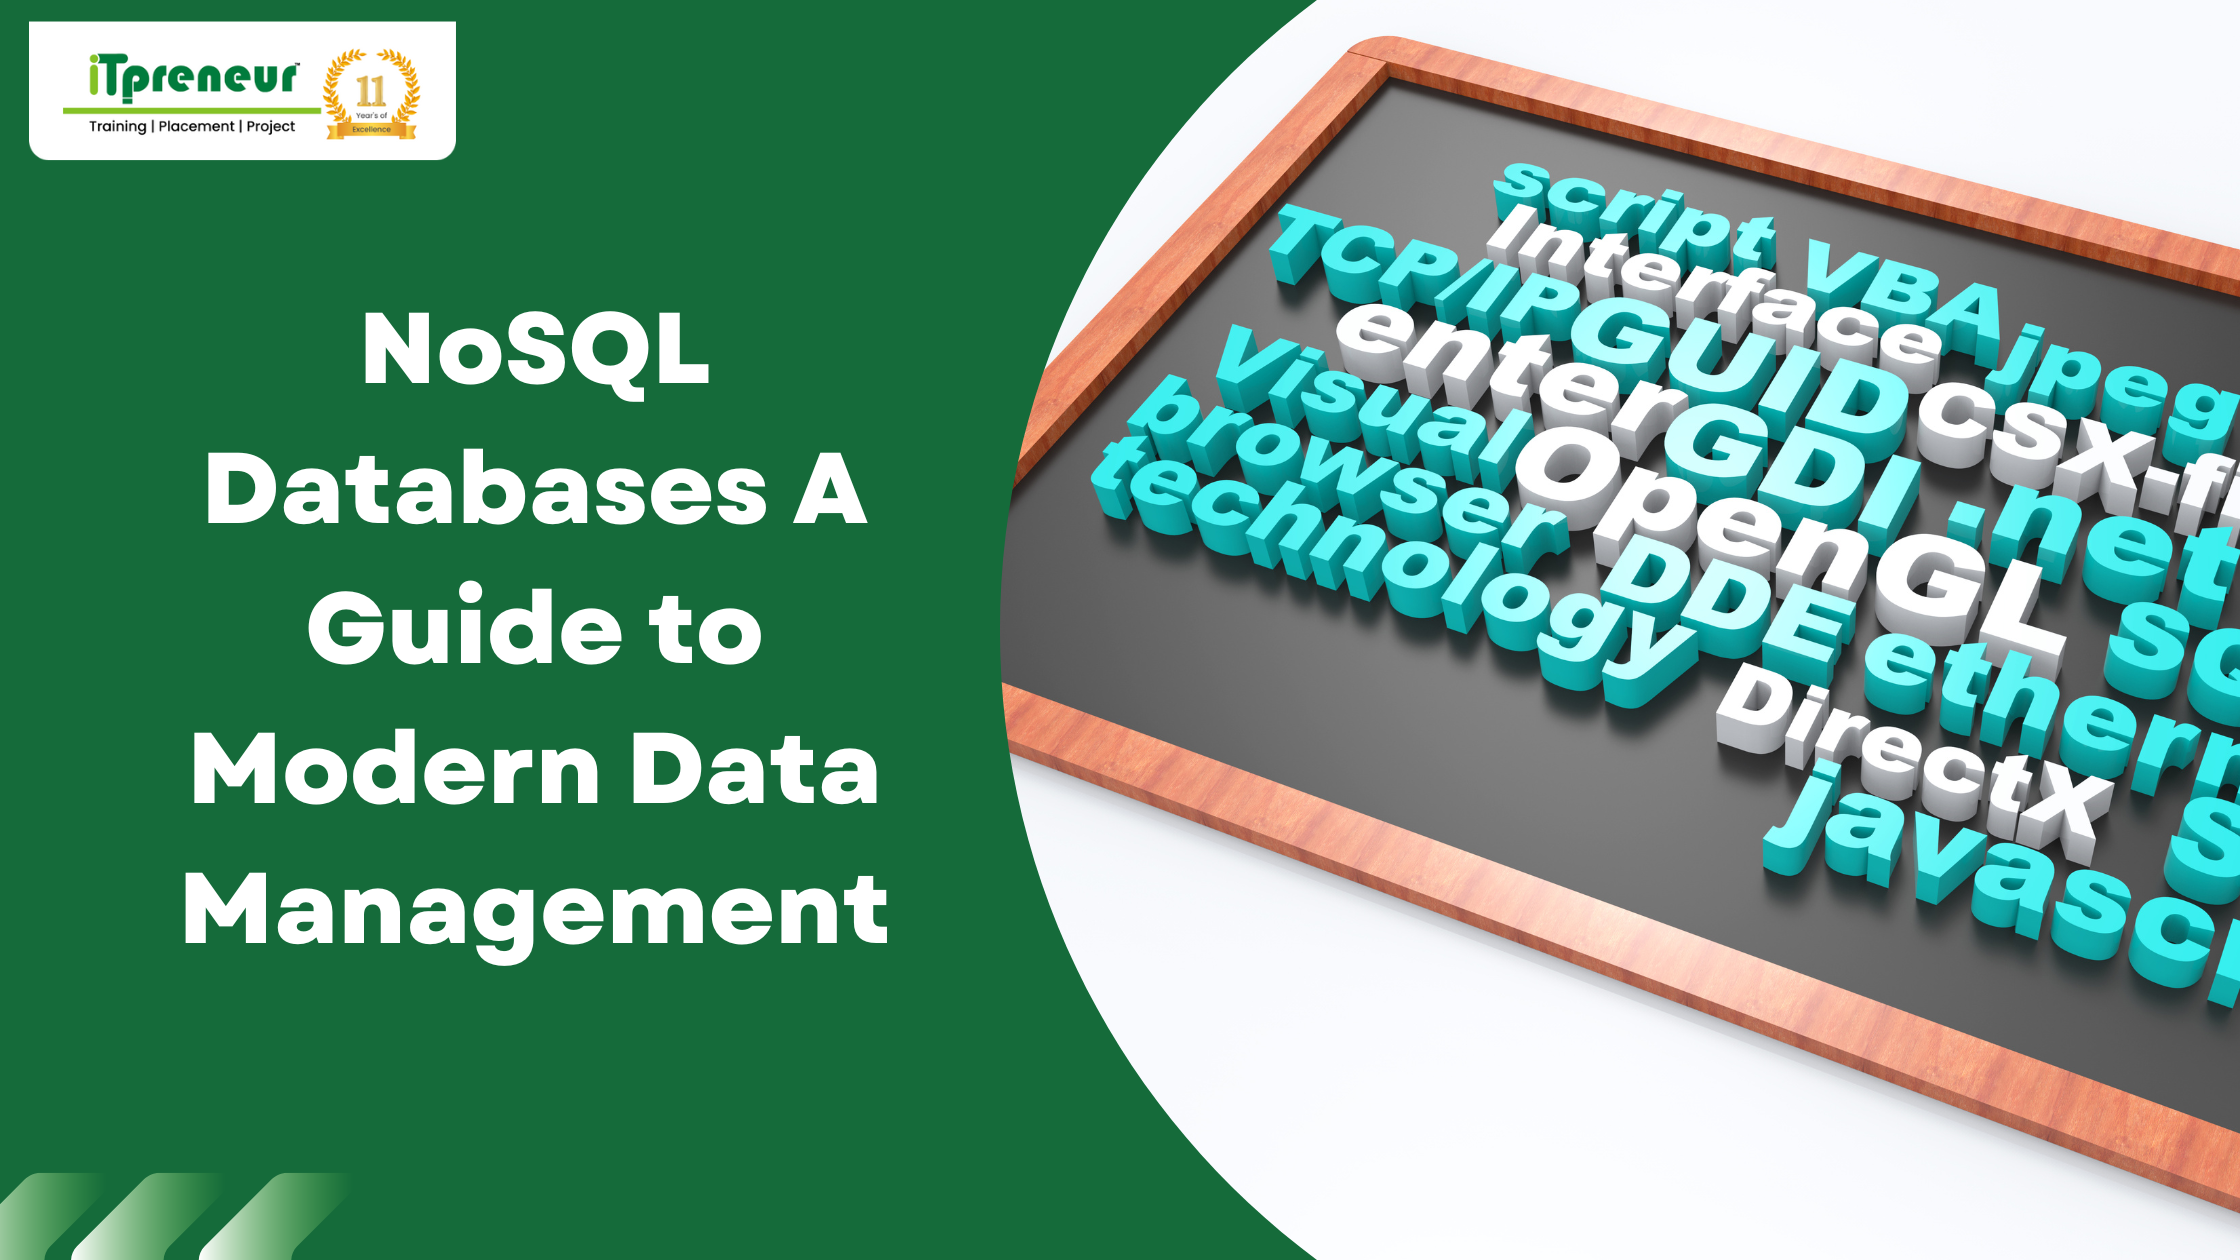 NoSQL Databases A Guide to Modern Data Management